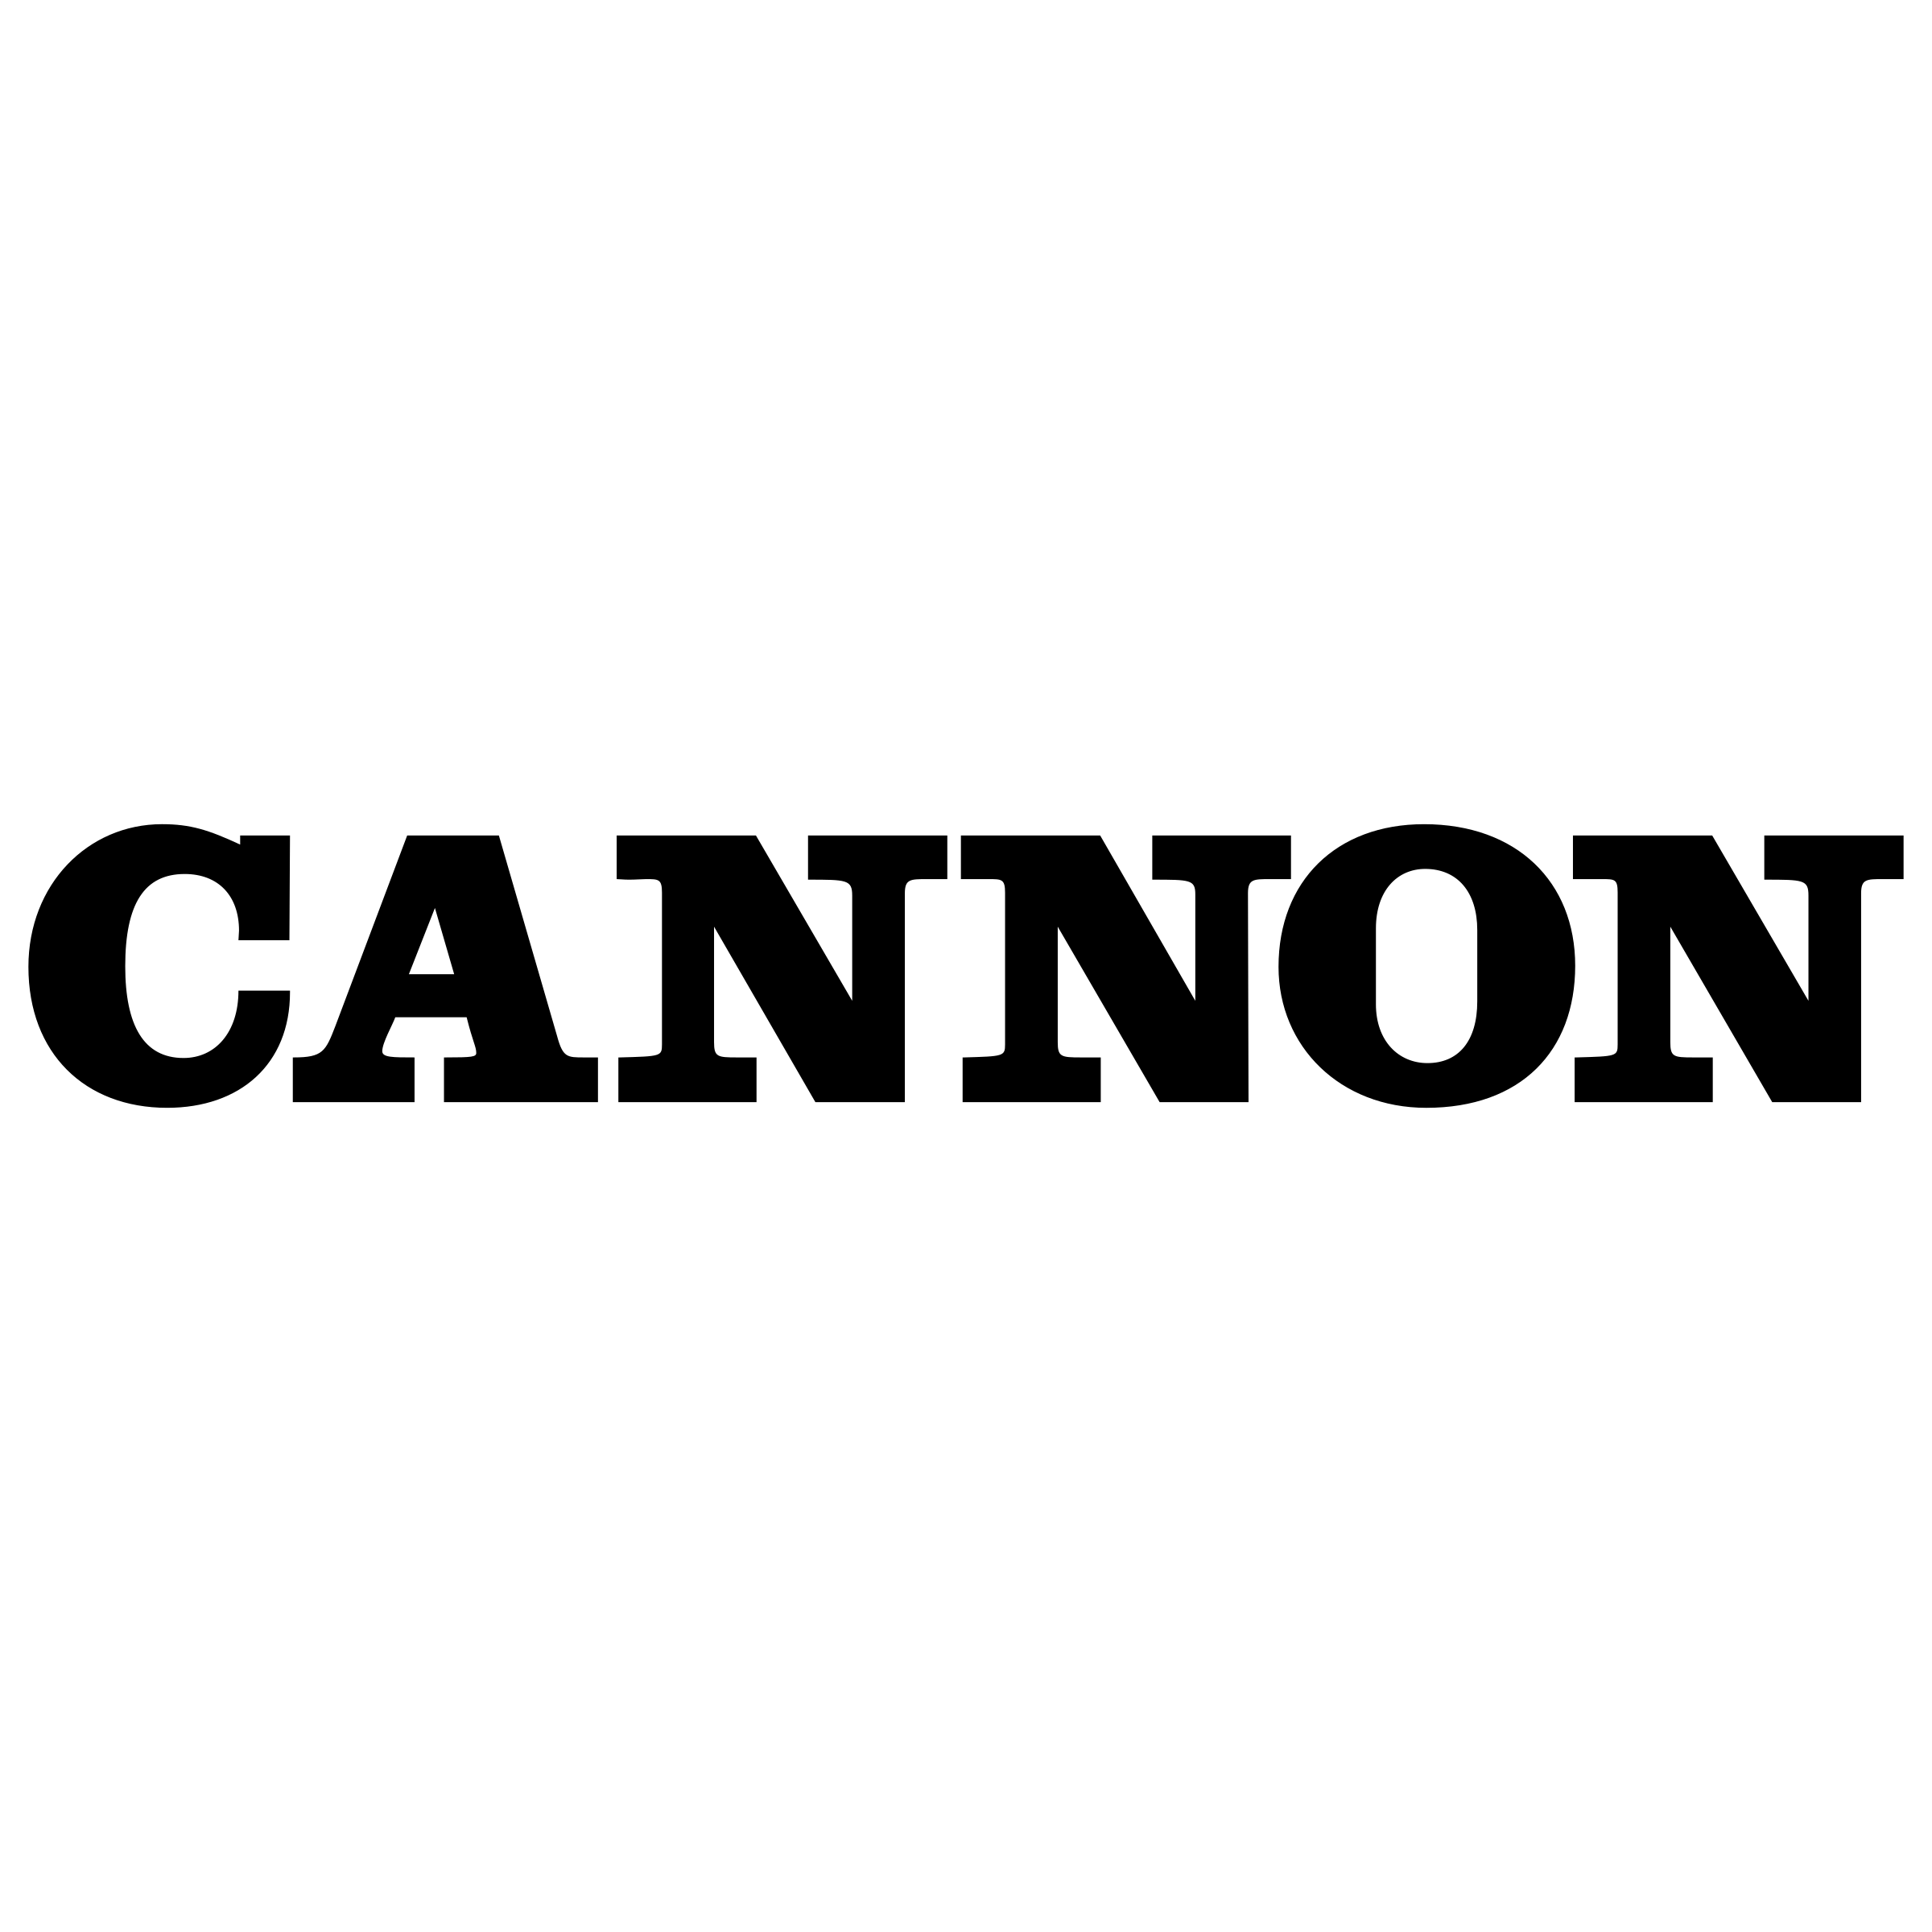 Cannon Logo - Cannon Logo PNG Transparent & SVG Vector - Freebie Supply